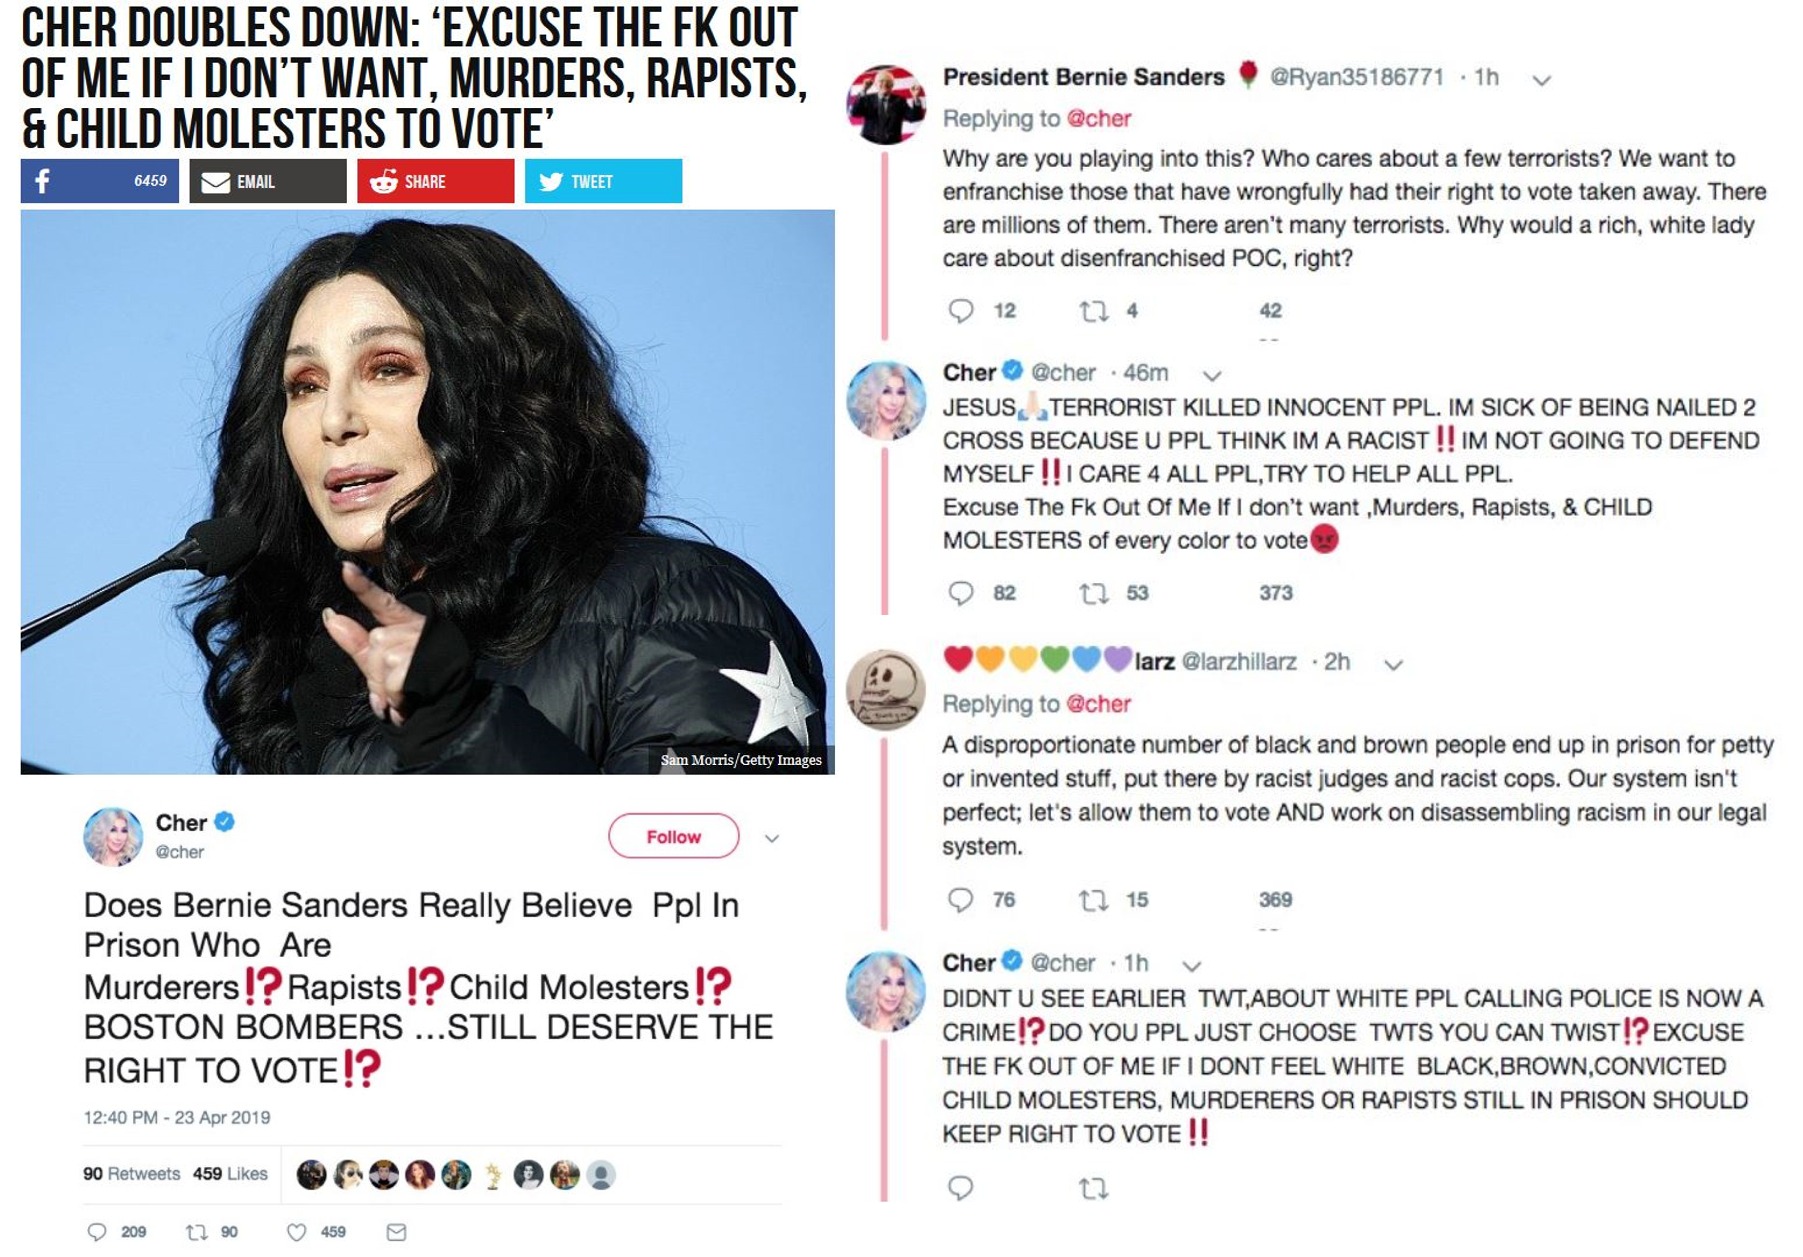 Conservative memes - media - Cher Doubles Down "Excuse The Fk Out Of Me If I Don'T Want, Murders, Rapists, & Child Molesters To Vote' f Shie Et President Bernie Sanders Ryan35186771.th Ocher Why are you playing into this? Who cares about a few terrorists?